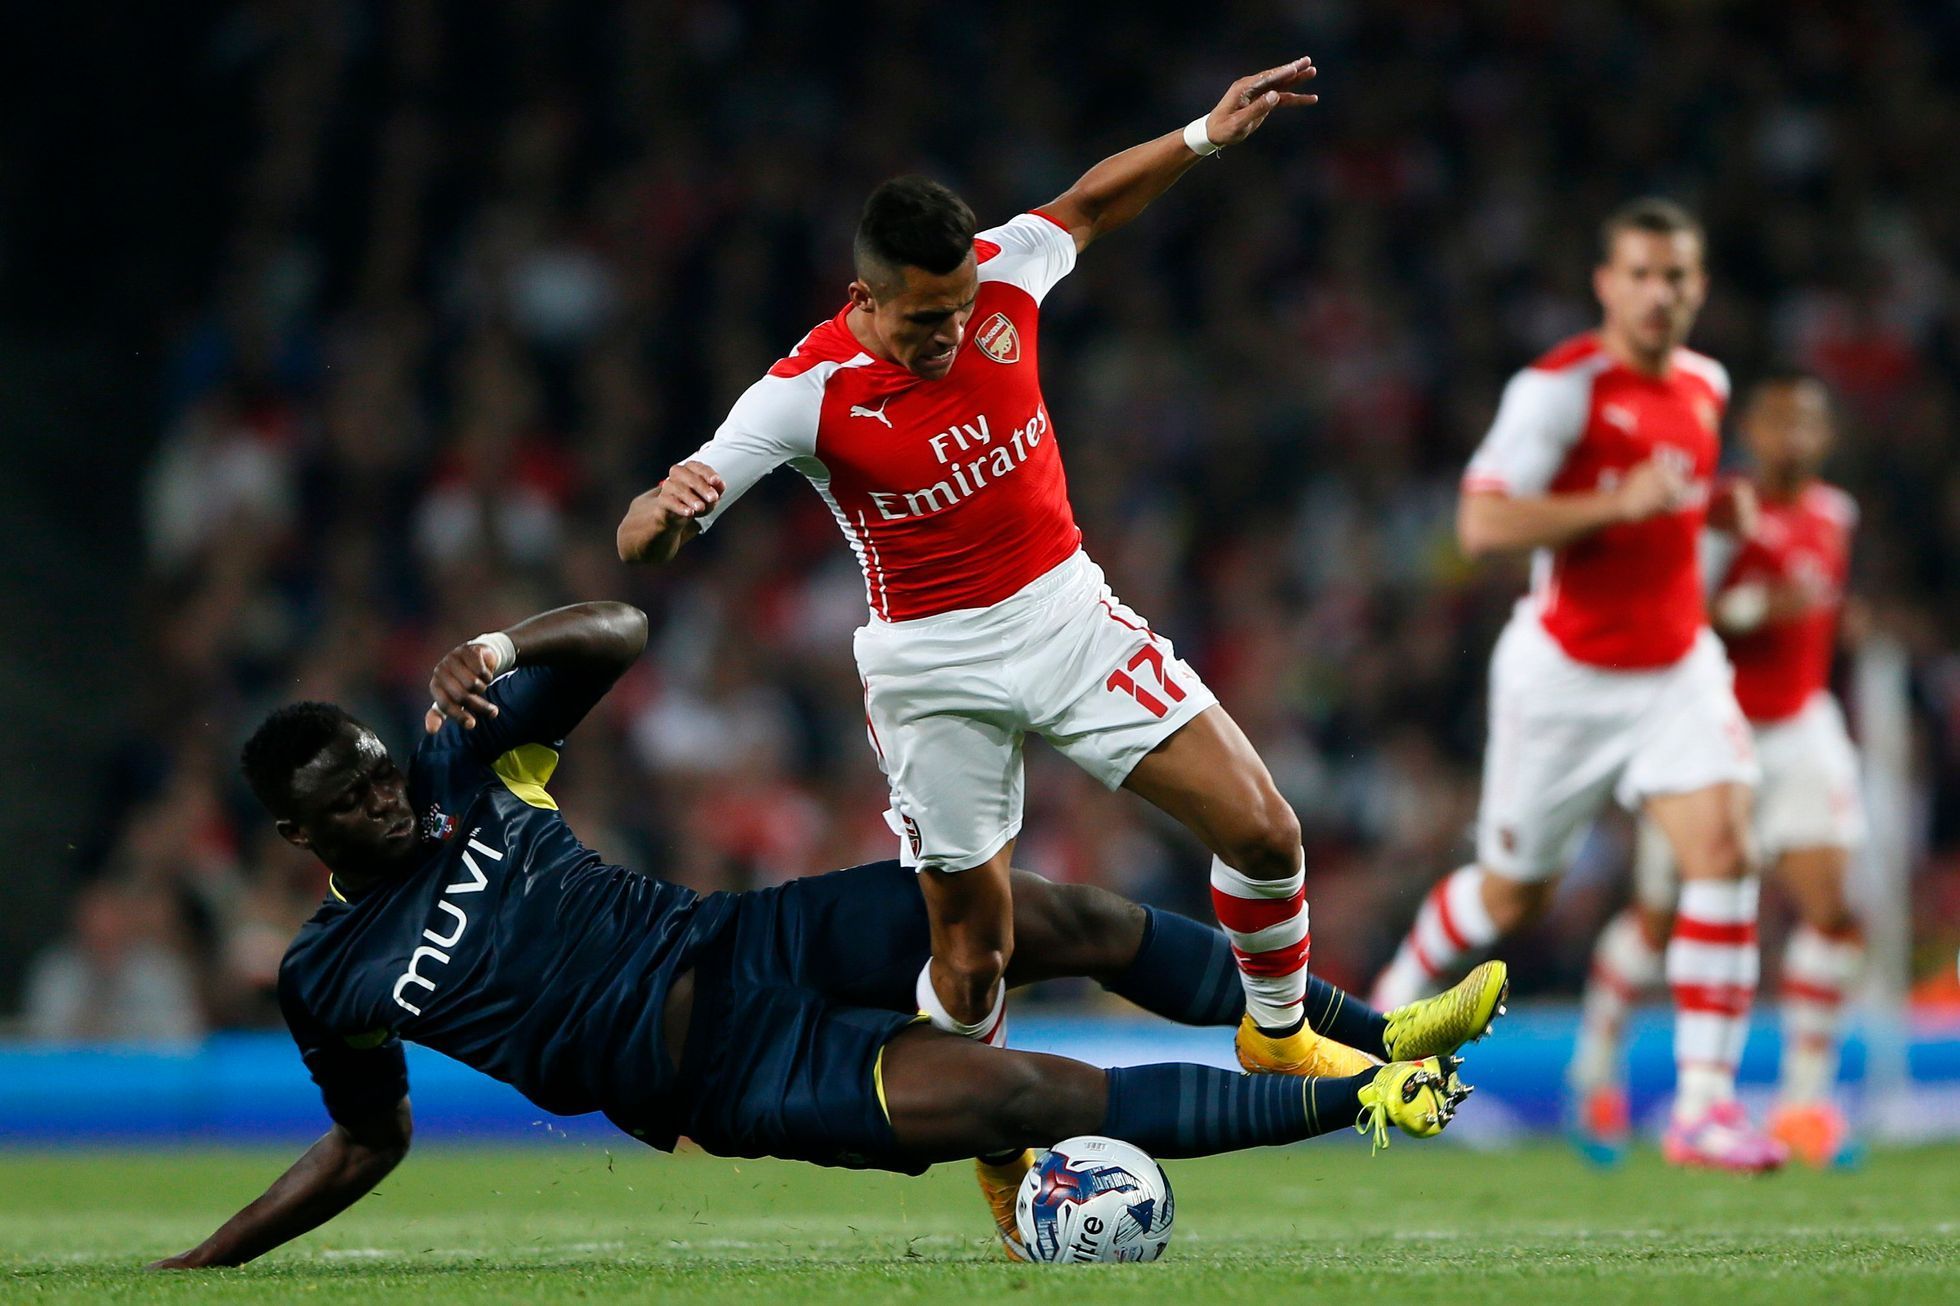 Arsenal's Sanchez fights for the ball with Southampton's Wanyama during their English League Cup soccer match at the Emirates stadium in London